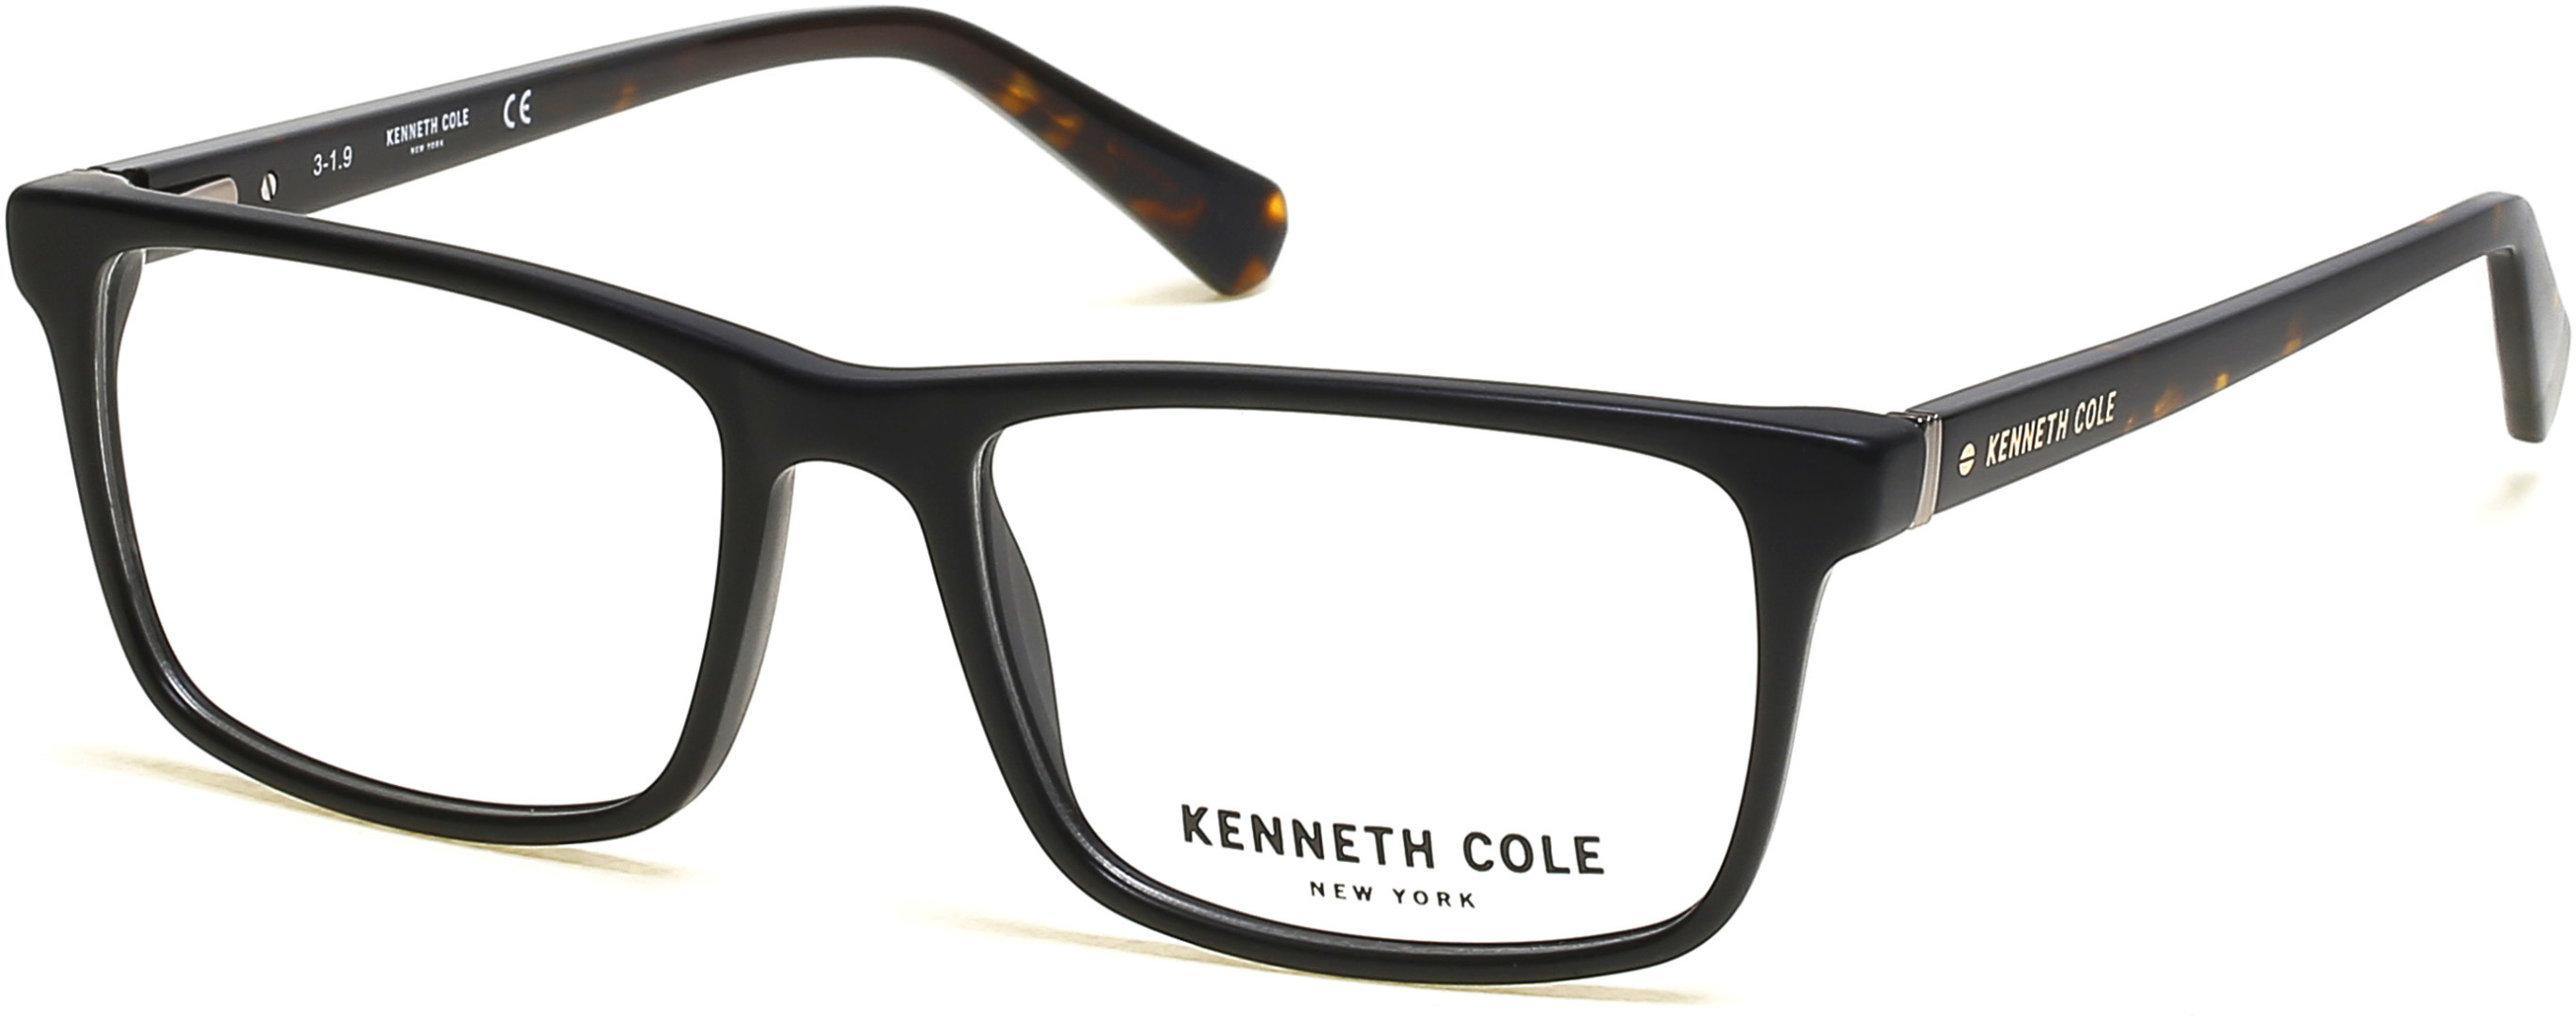 KENNETH COLE NY 0300